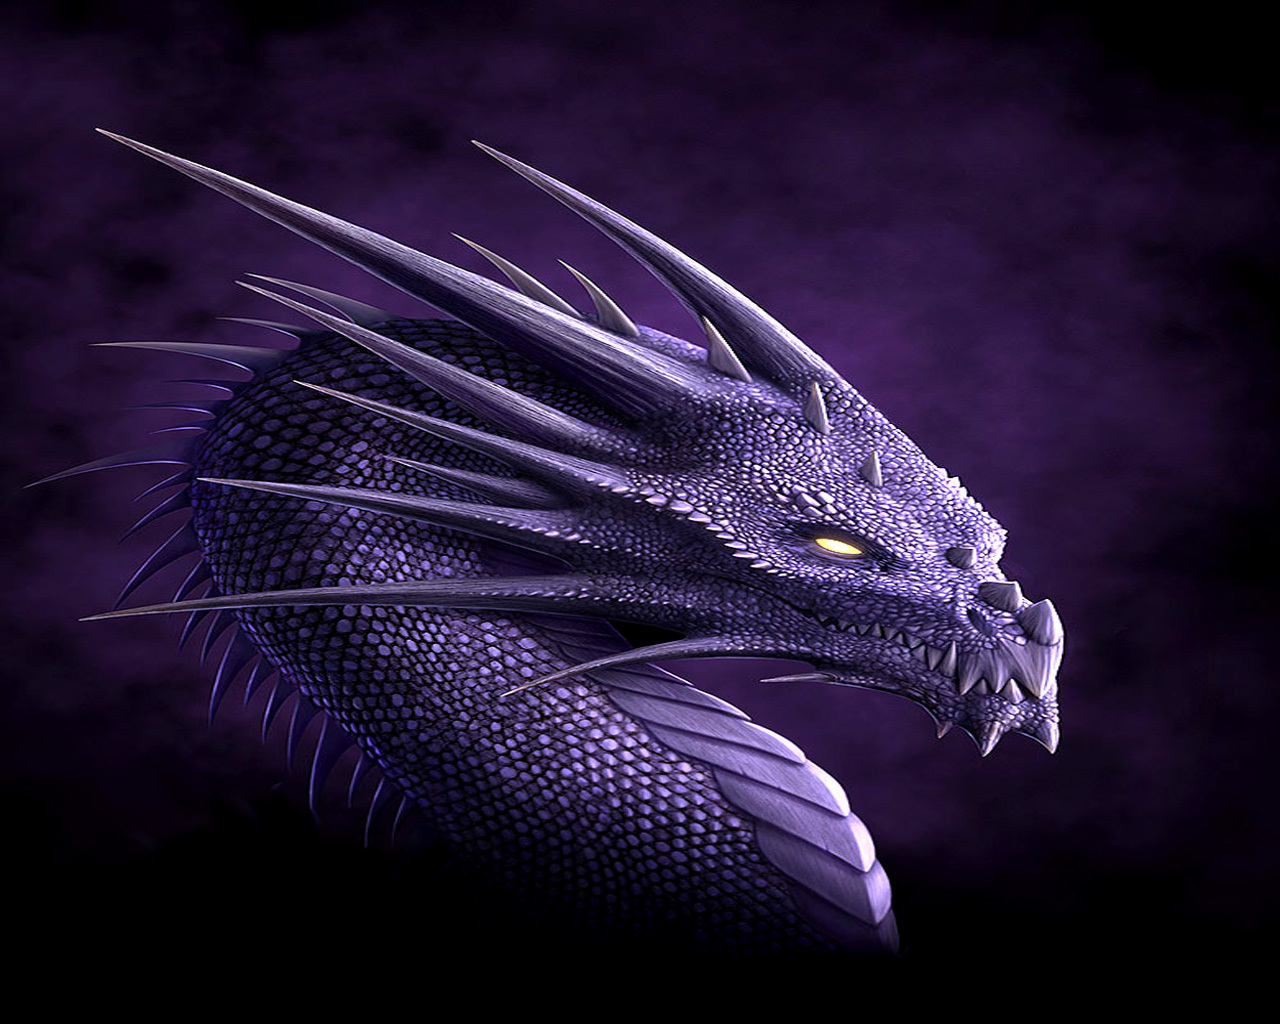 Dragons images Dragon Wallpaper HD wallpaper and background photos